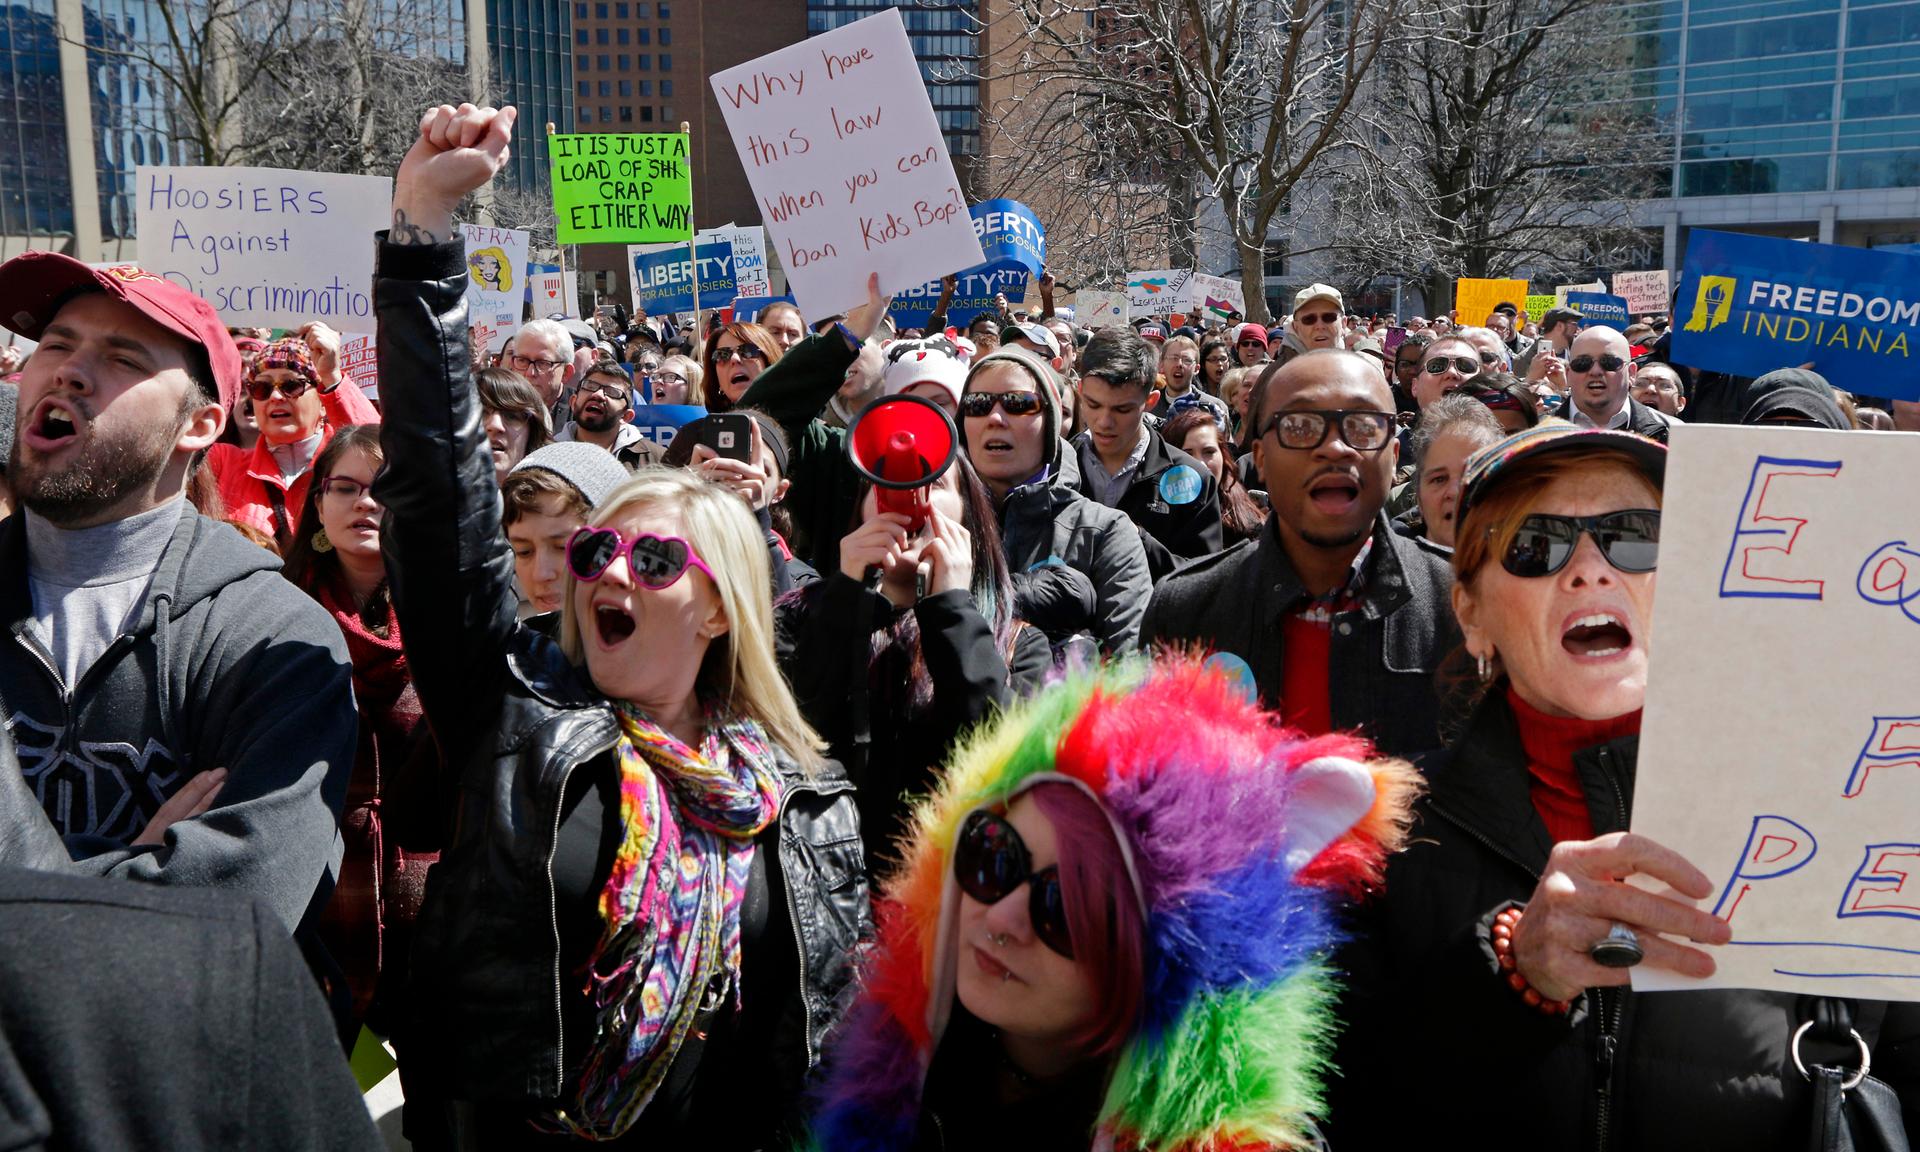 Demonstrators gather at a rally in Indianapolis on March 28, 2015 to protest a controversial religious freedom bill recently signed by Indiana Governor Mike Pence.